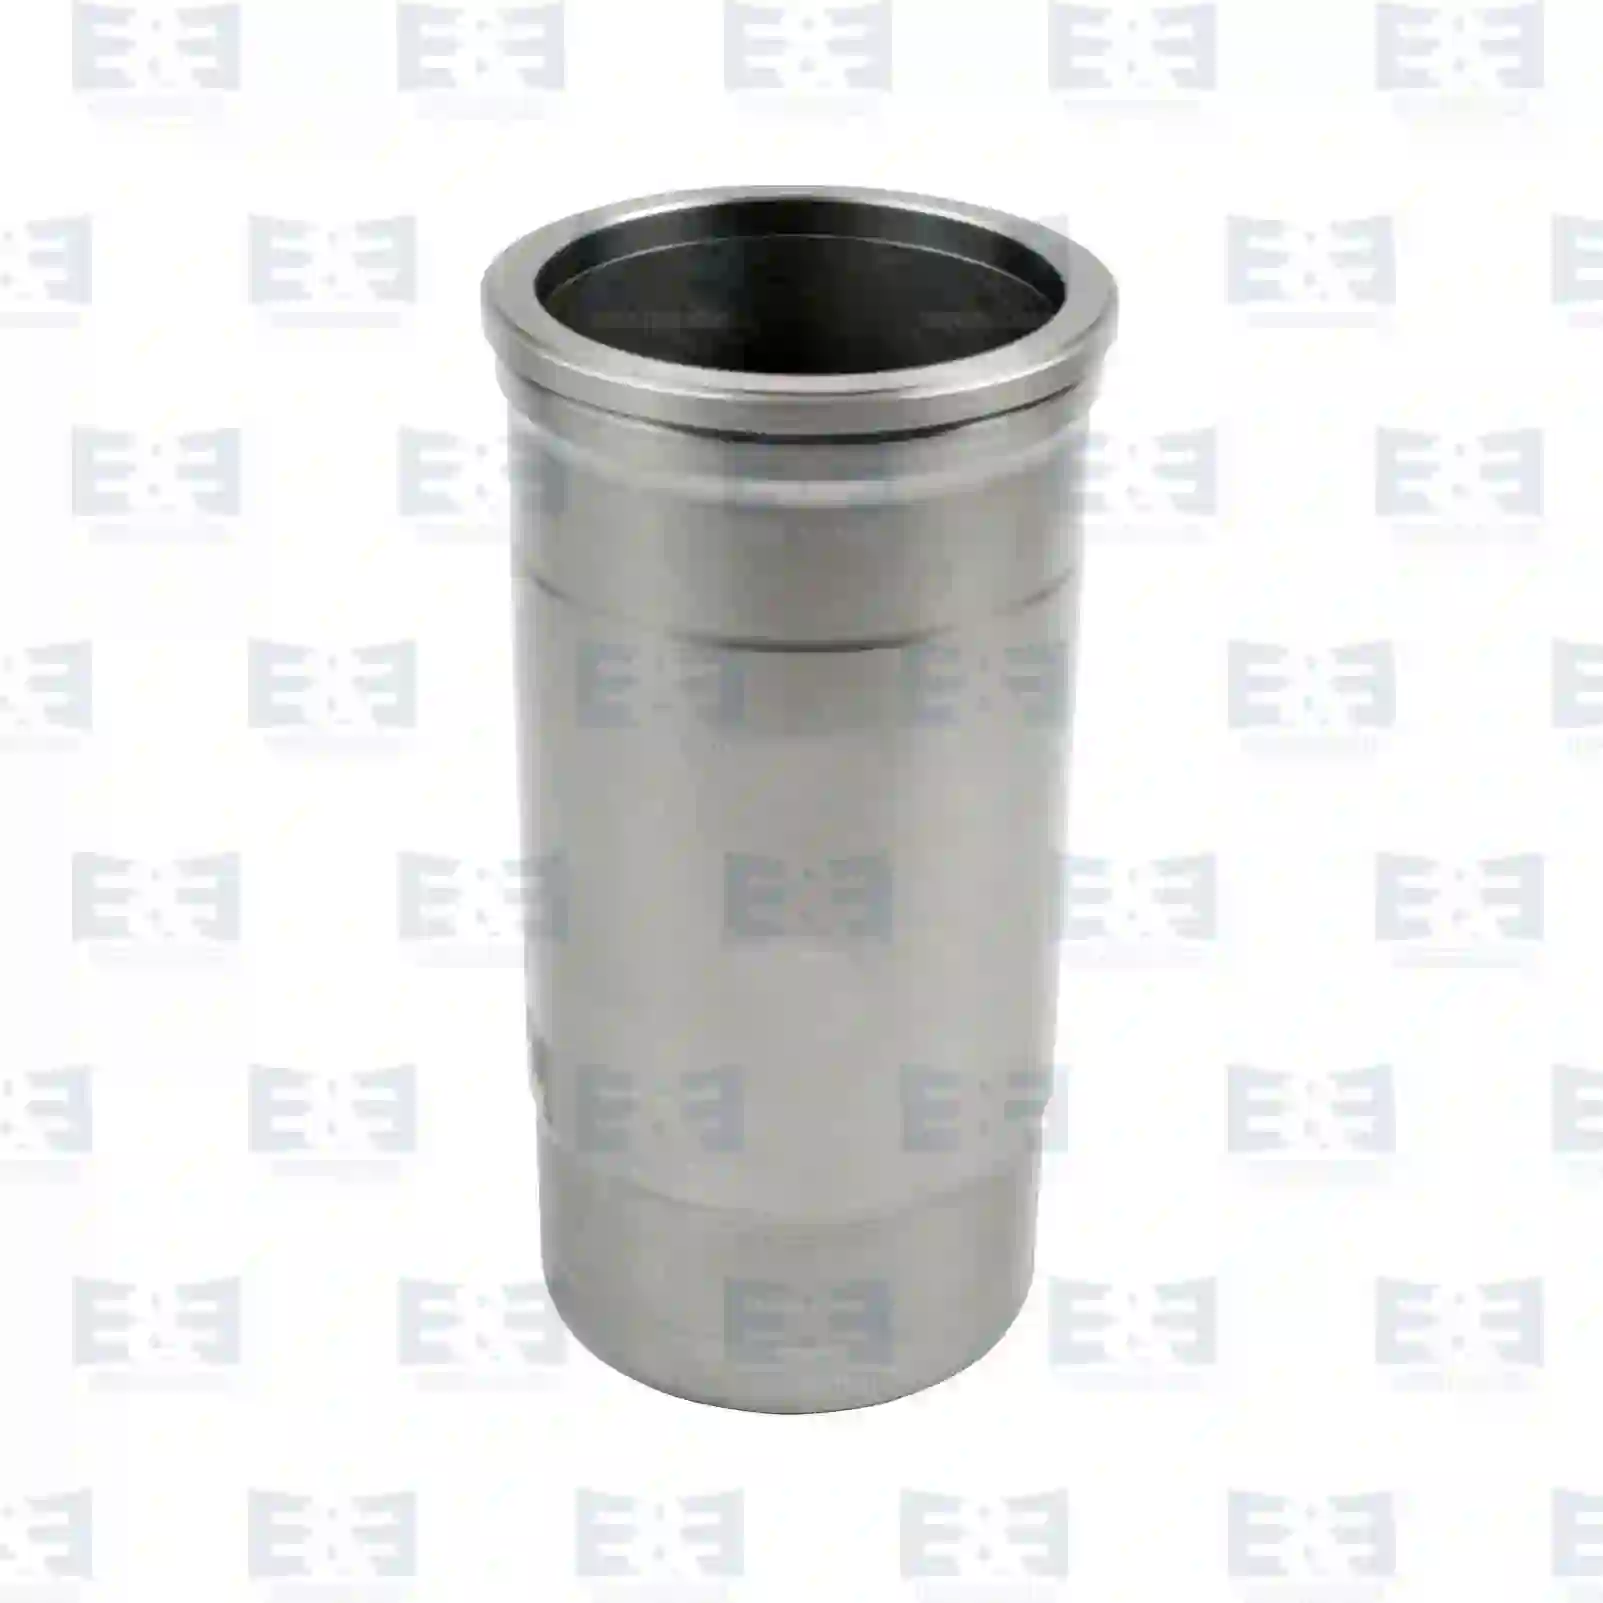 Cylinder liner, without seal rings, 2E2207933, 1302095, 1305095, , ||  2E2207933 E&E Truck Spare Parts | Truck Spare Parts, Auotomotive Spare Parts Cylinder liner, without seal rings, 2E2207933, 1302095, 1305095, , ||  2E2207933 E&E Truck Spare Parts | Truck Spare Parts, Auotomotive Spare Parts